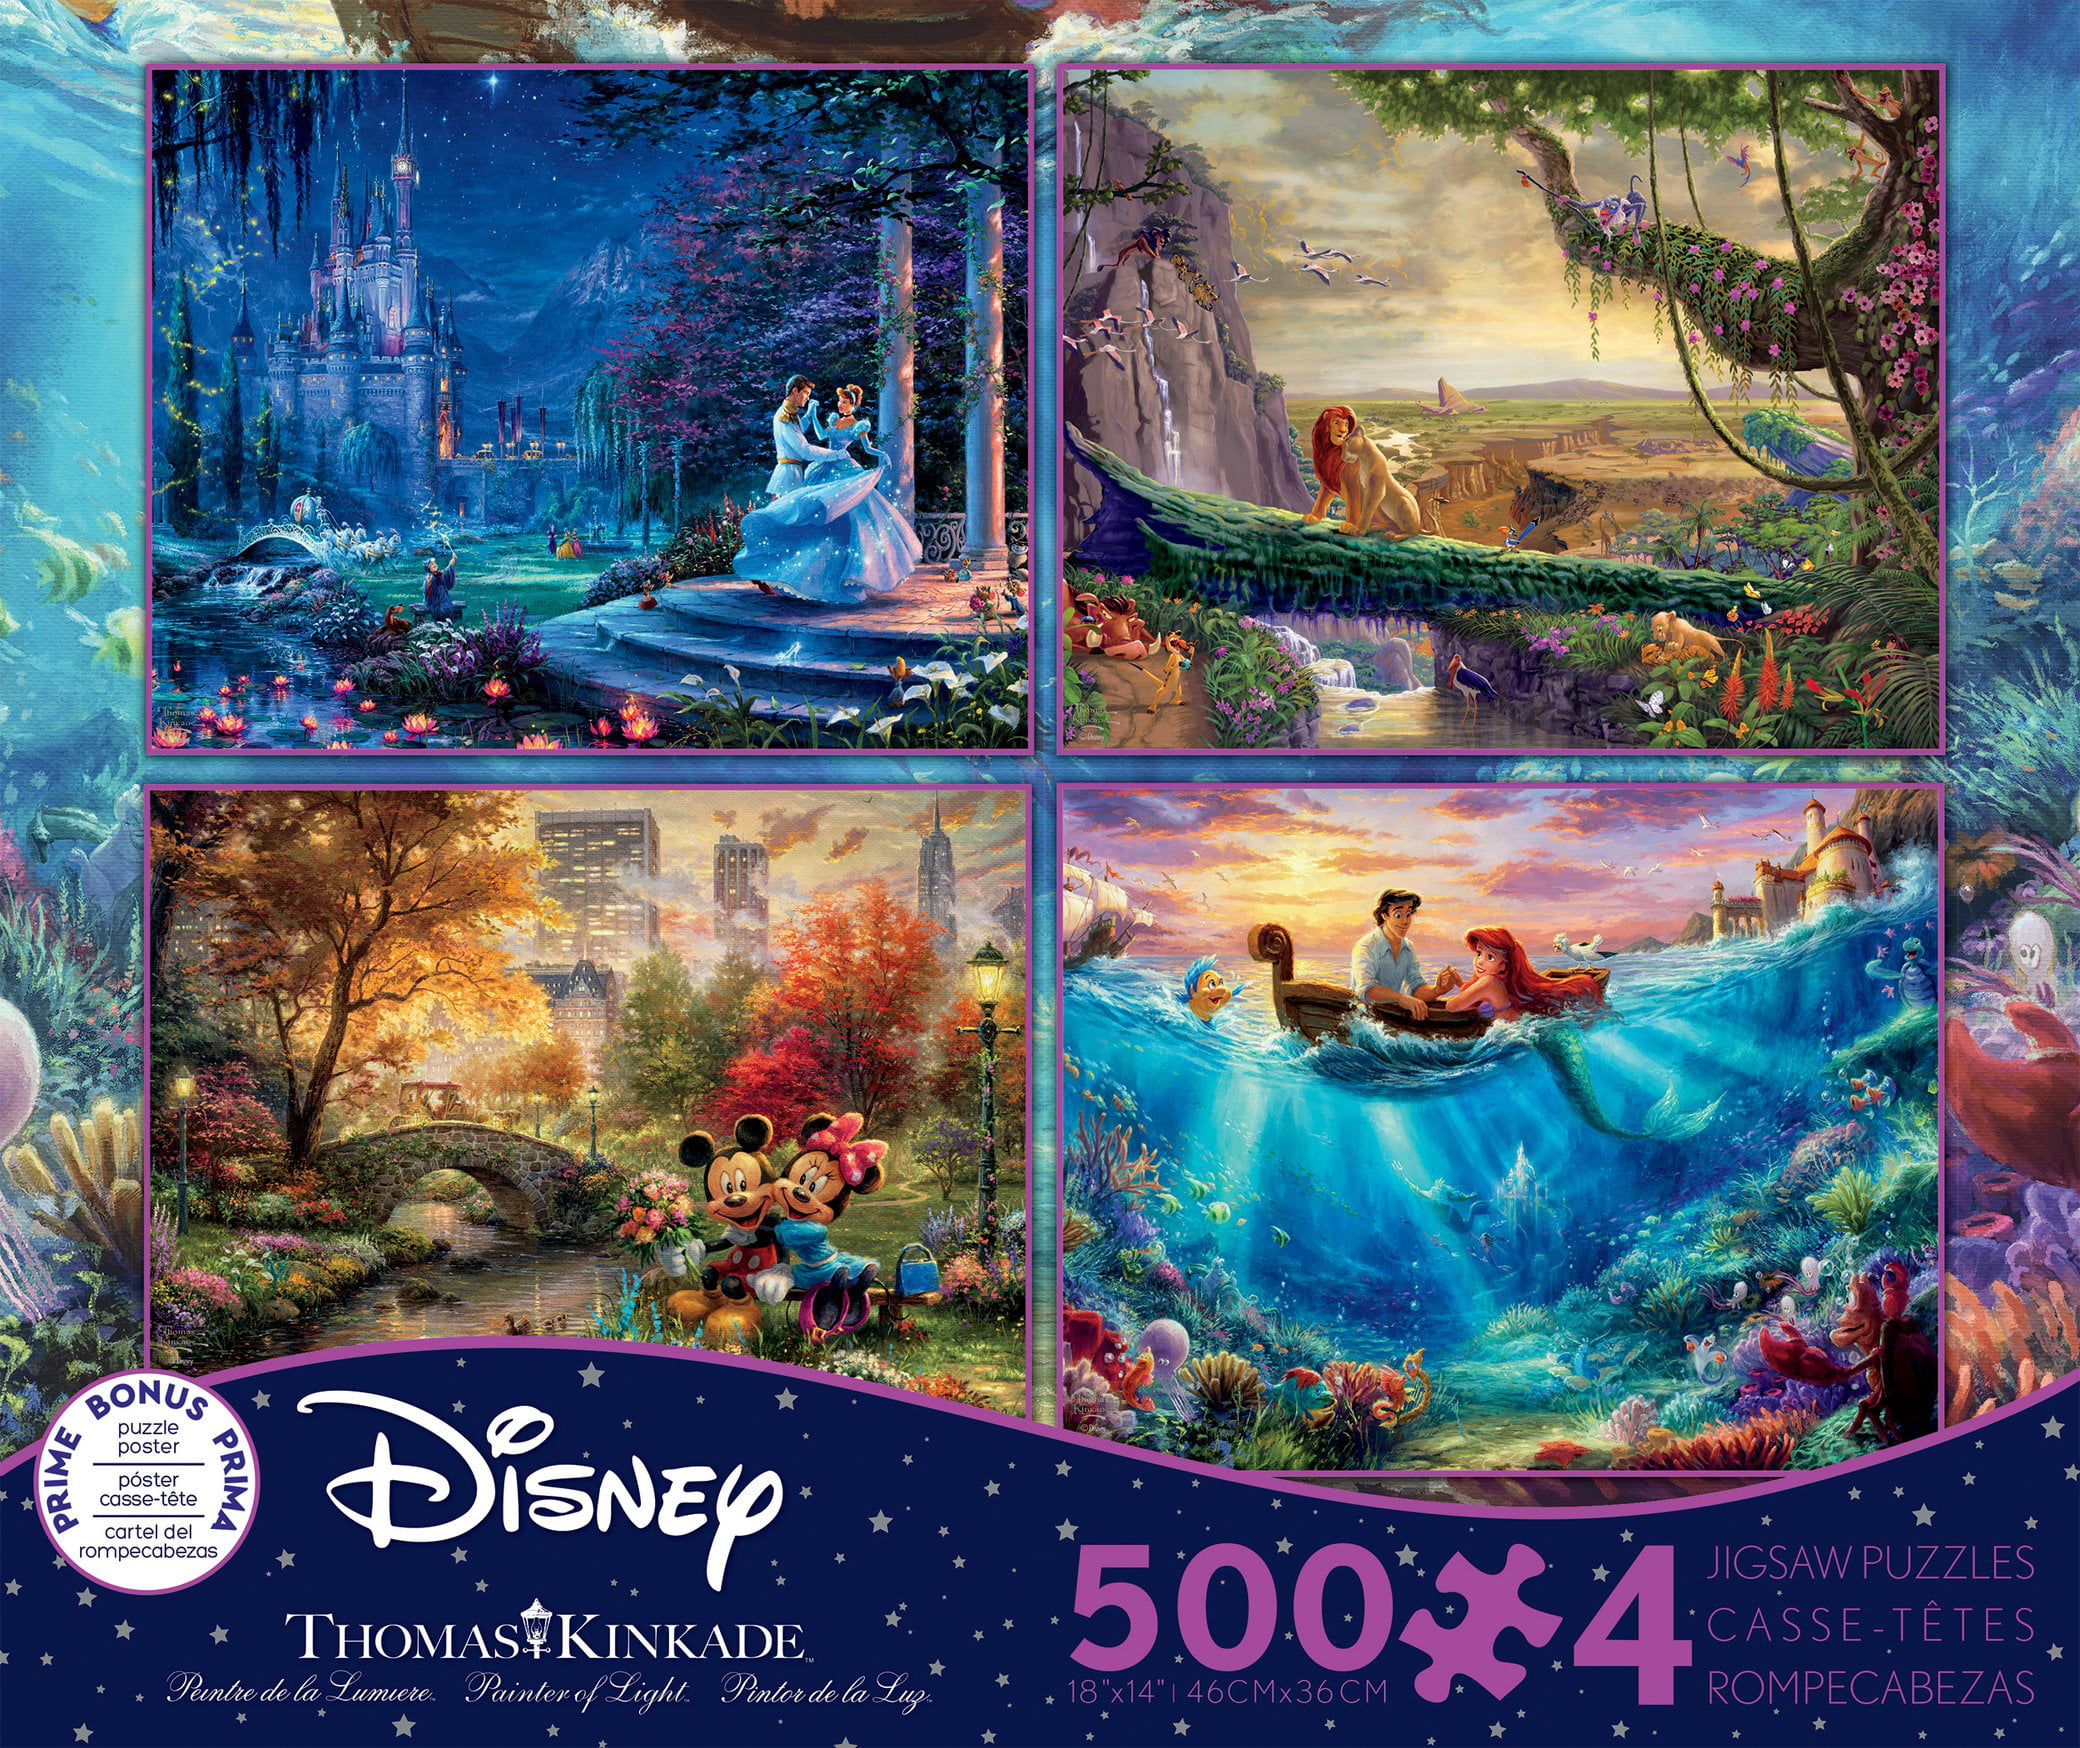 Thomas Kinkade The Disney Romance Collection 500pc 4 in 1 Jigsaw Puzzles Ceaco for sale online 